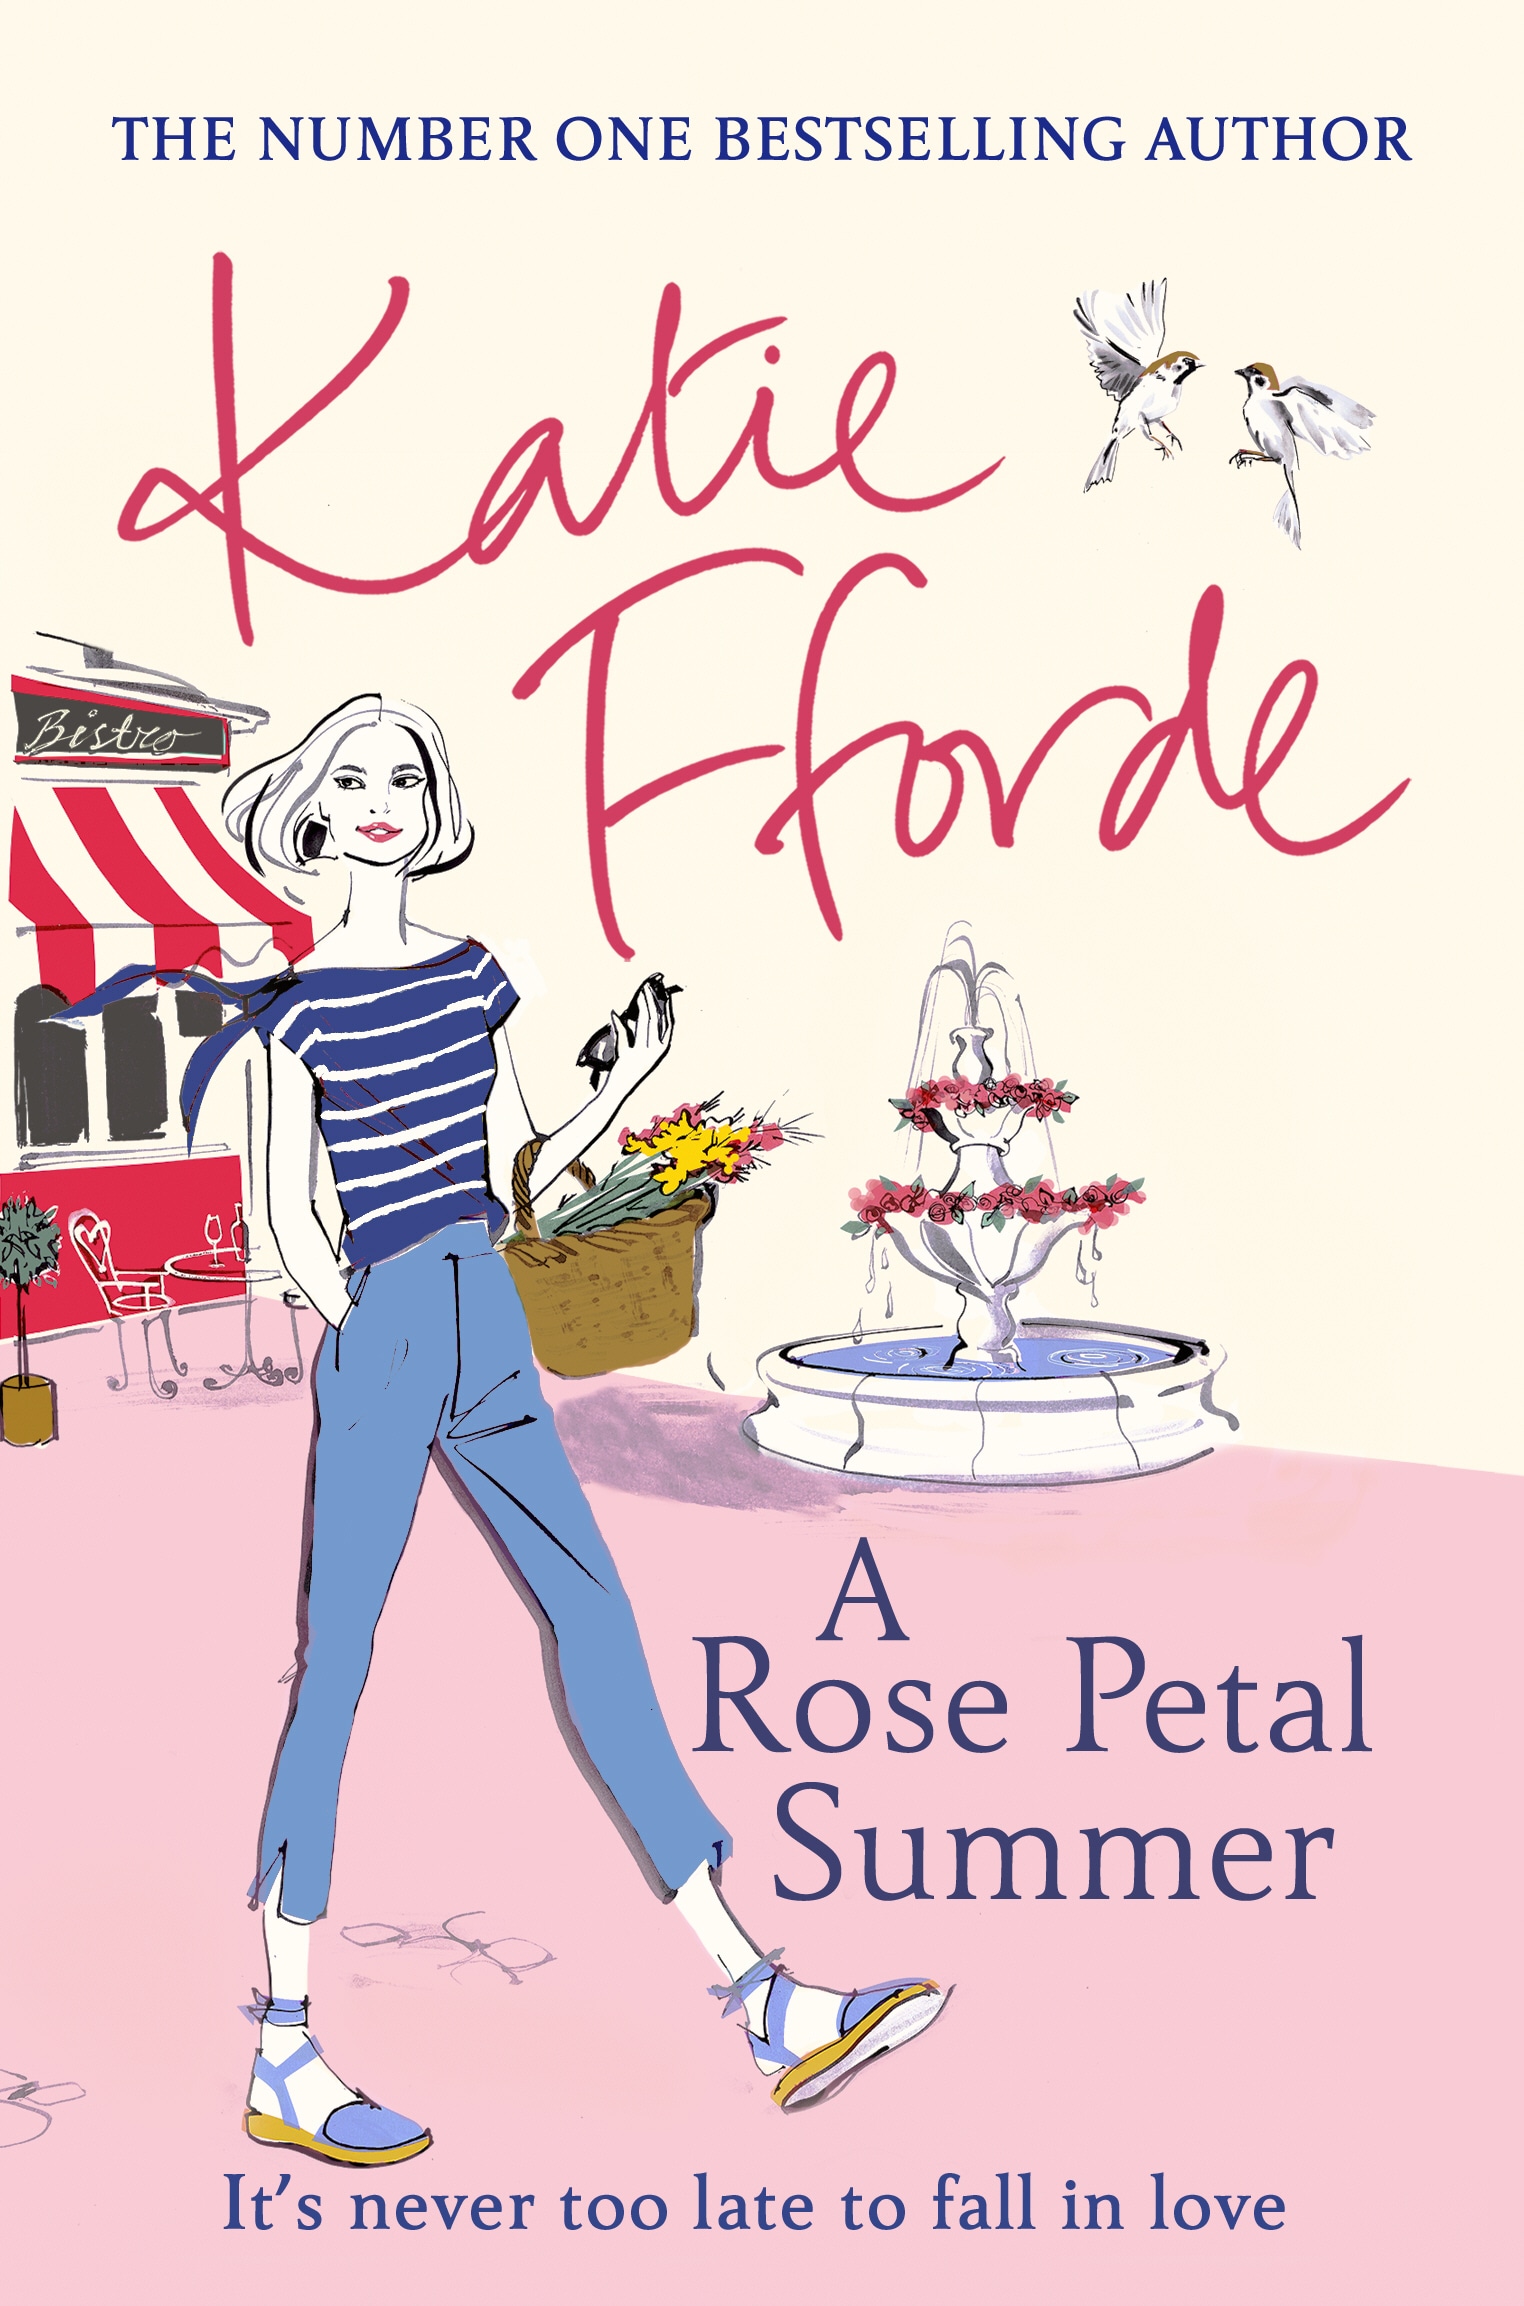 Book “A Rose Petal Summer” by Katie Fforde — February 6, 2020